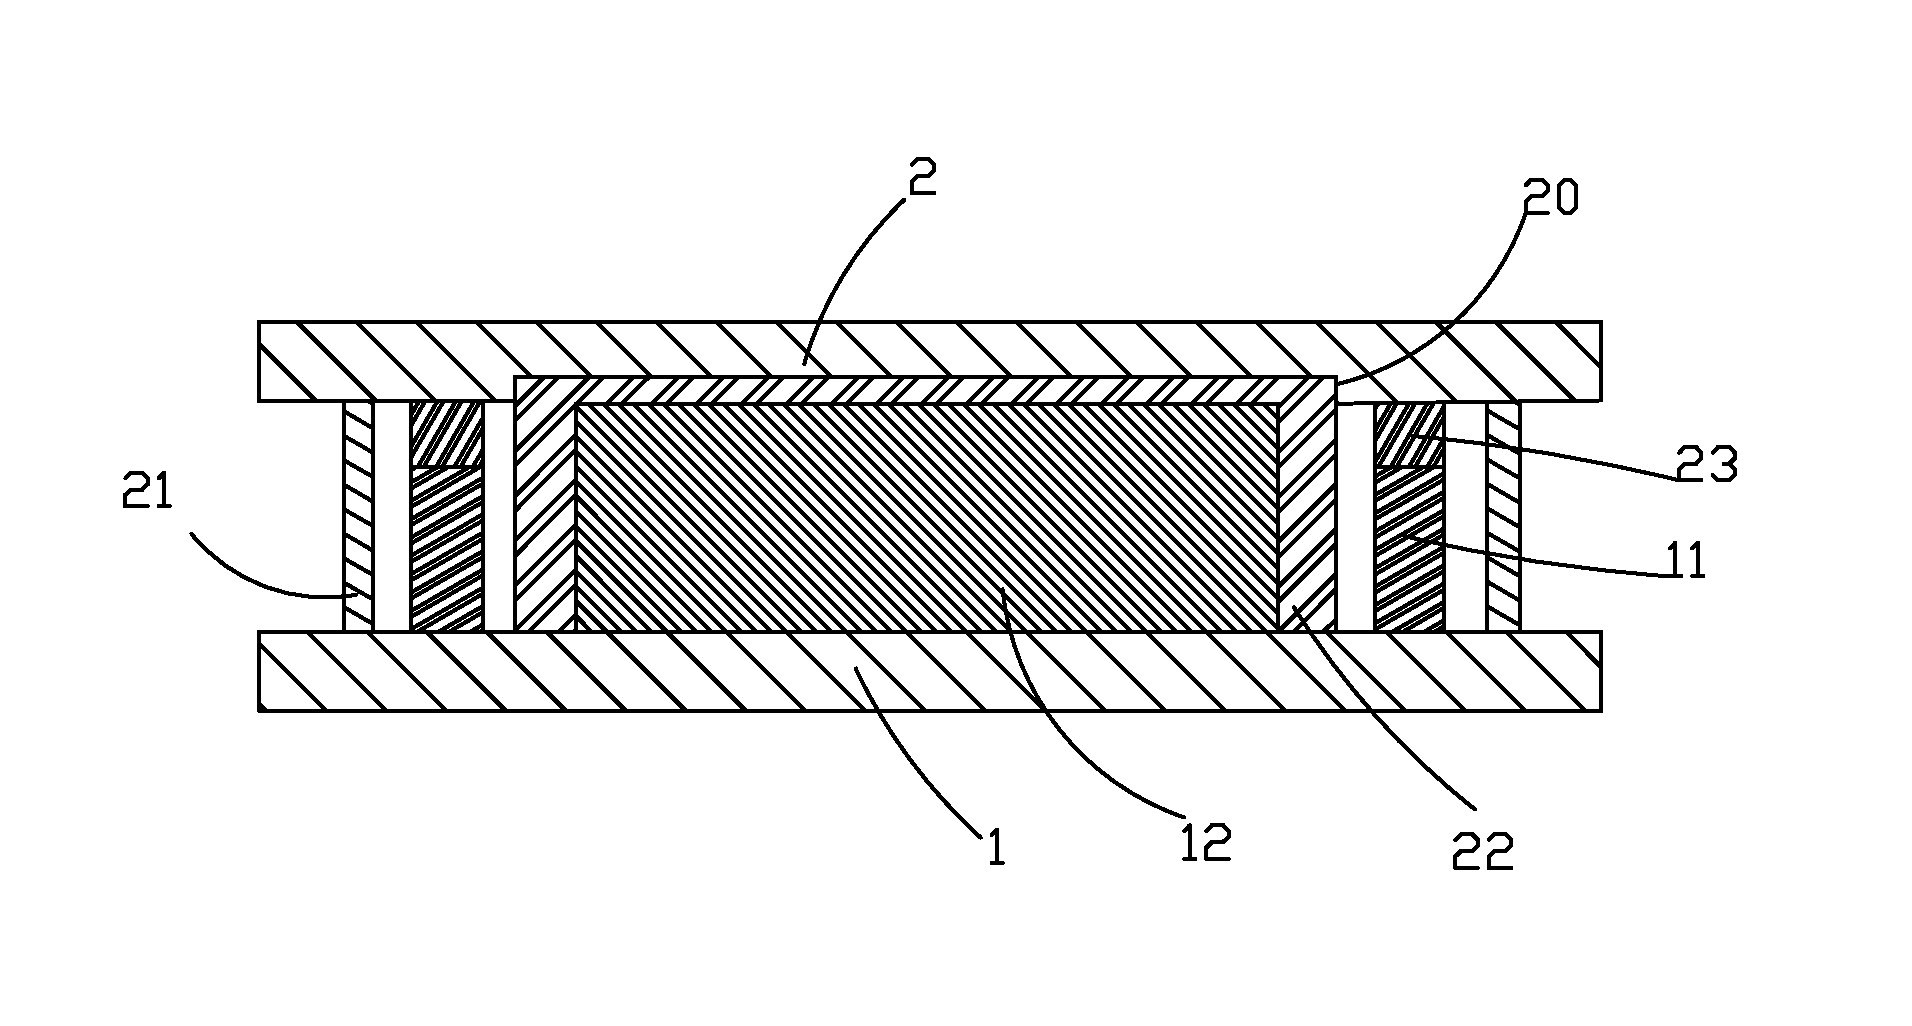 OLED package structure and packaging method